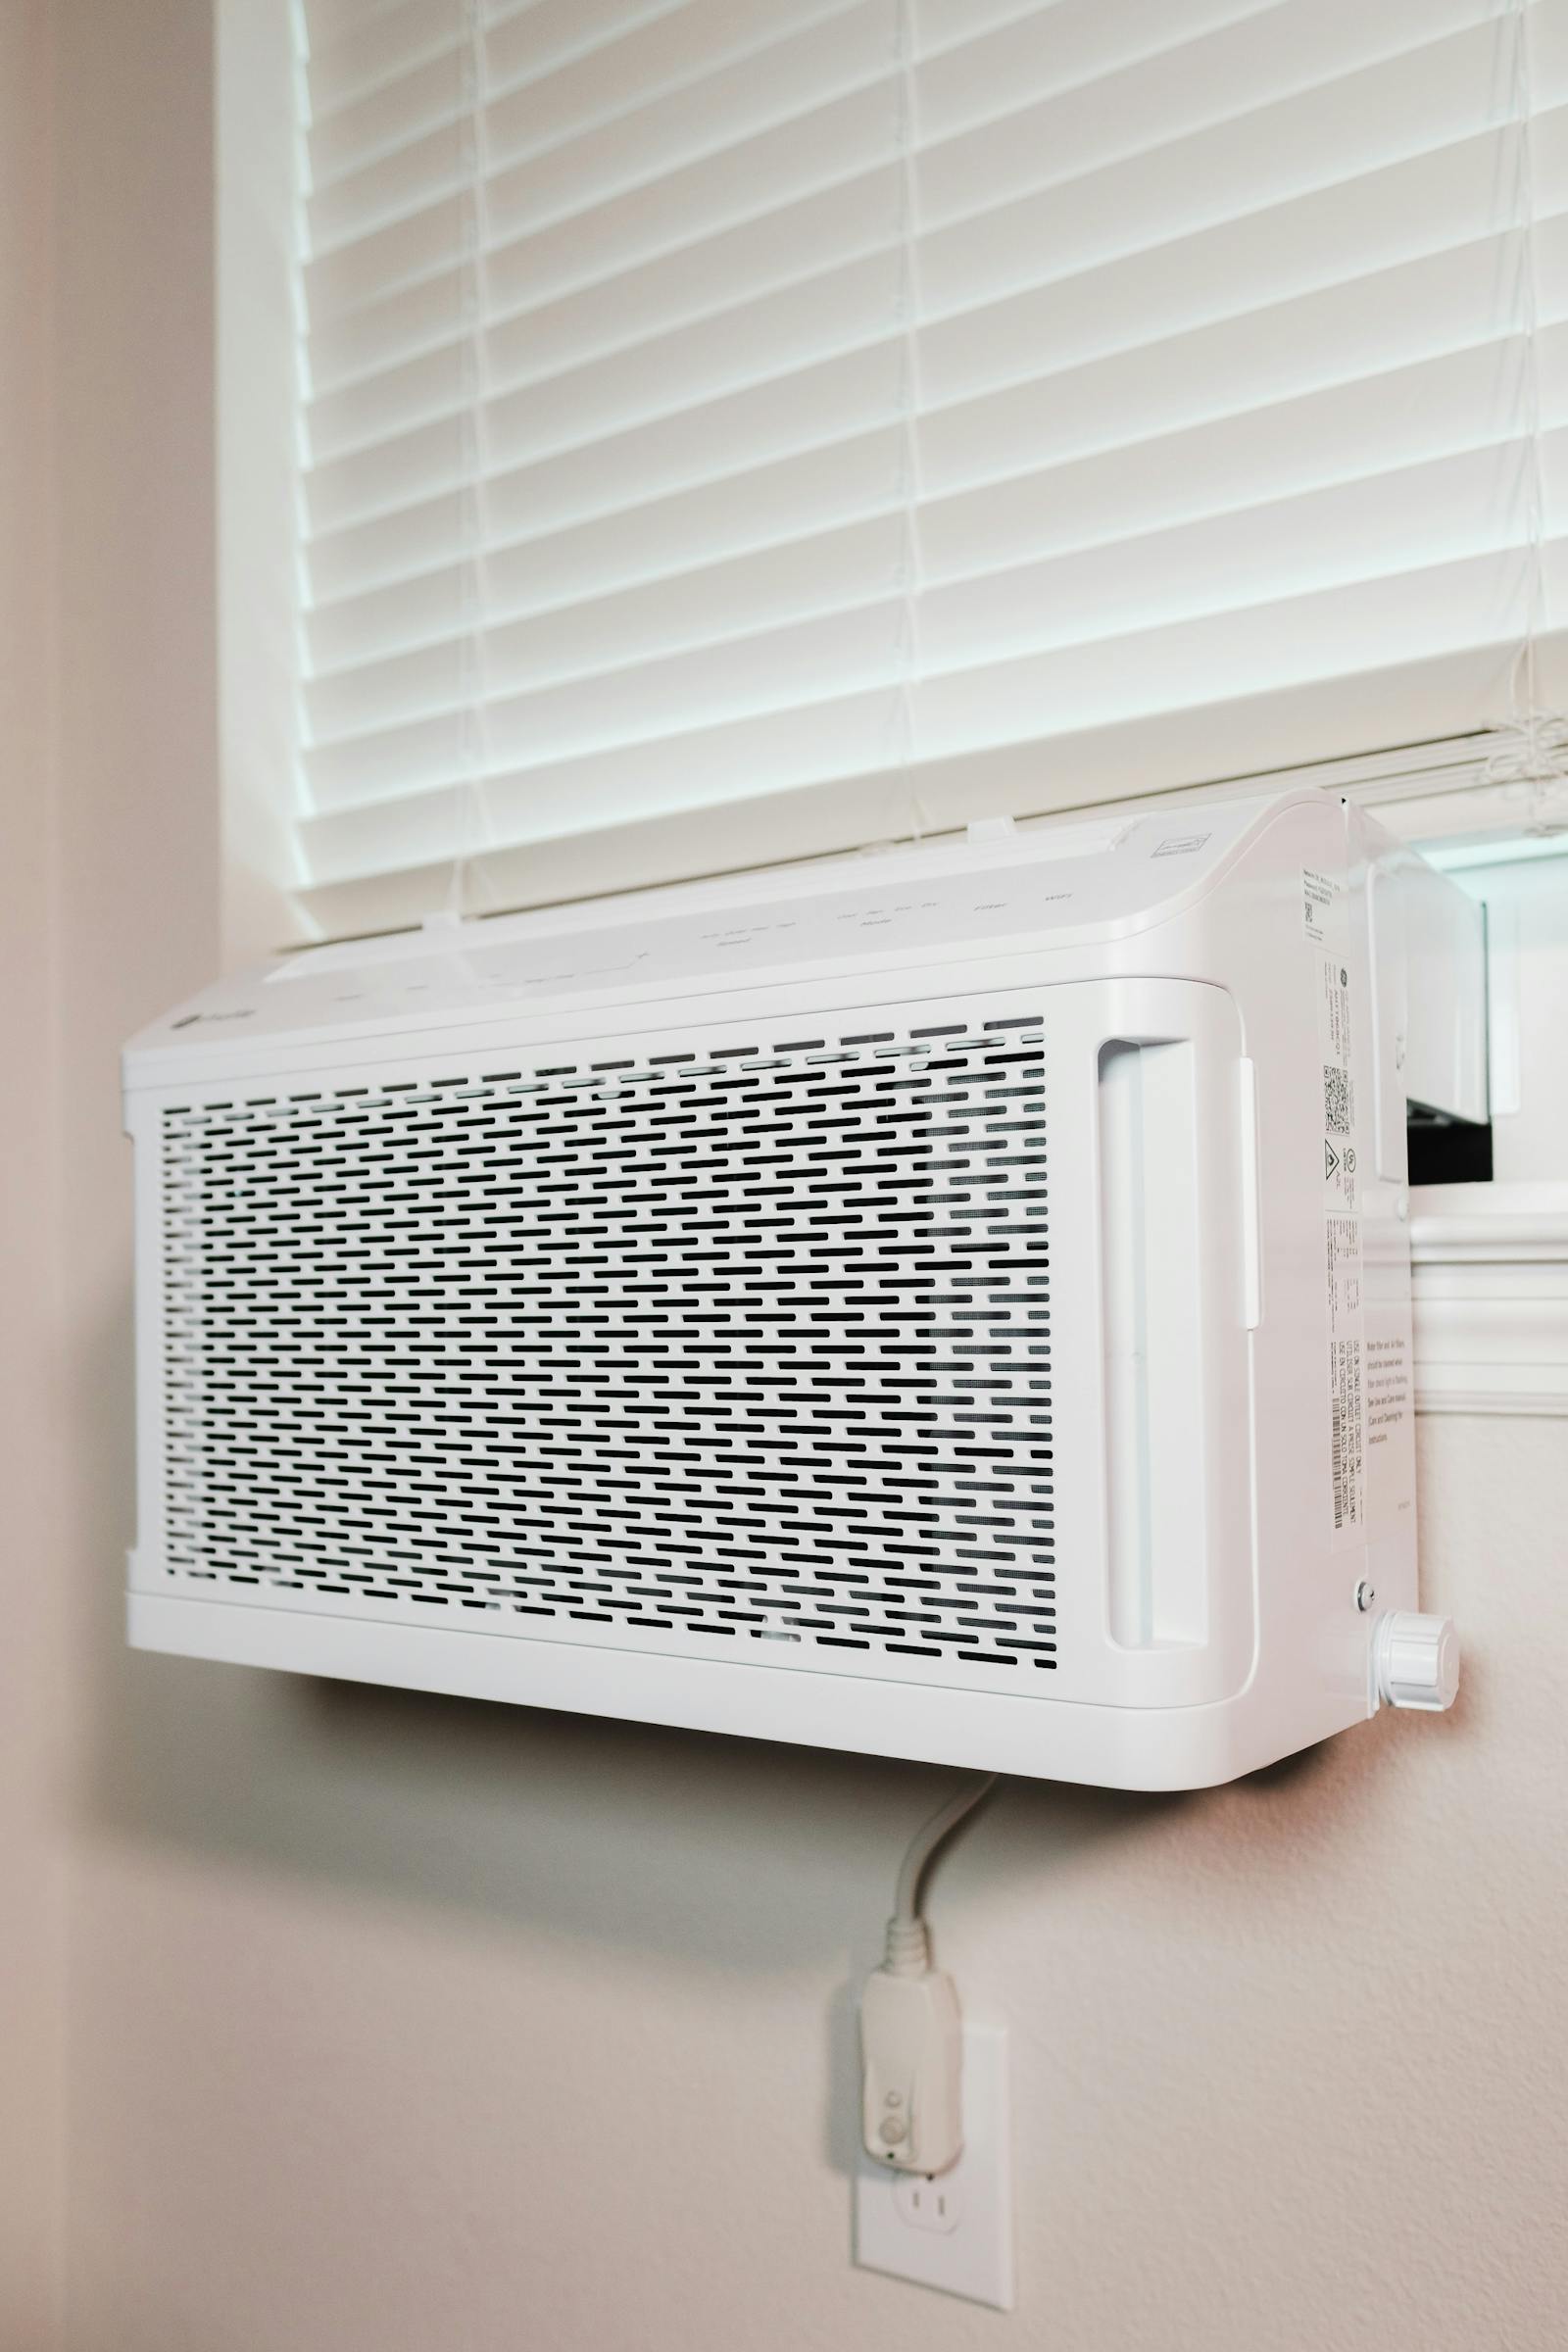 21 tips about how to save money on your AC